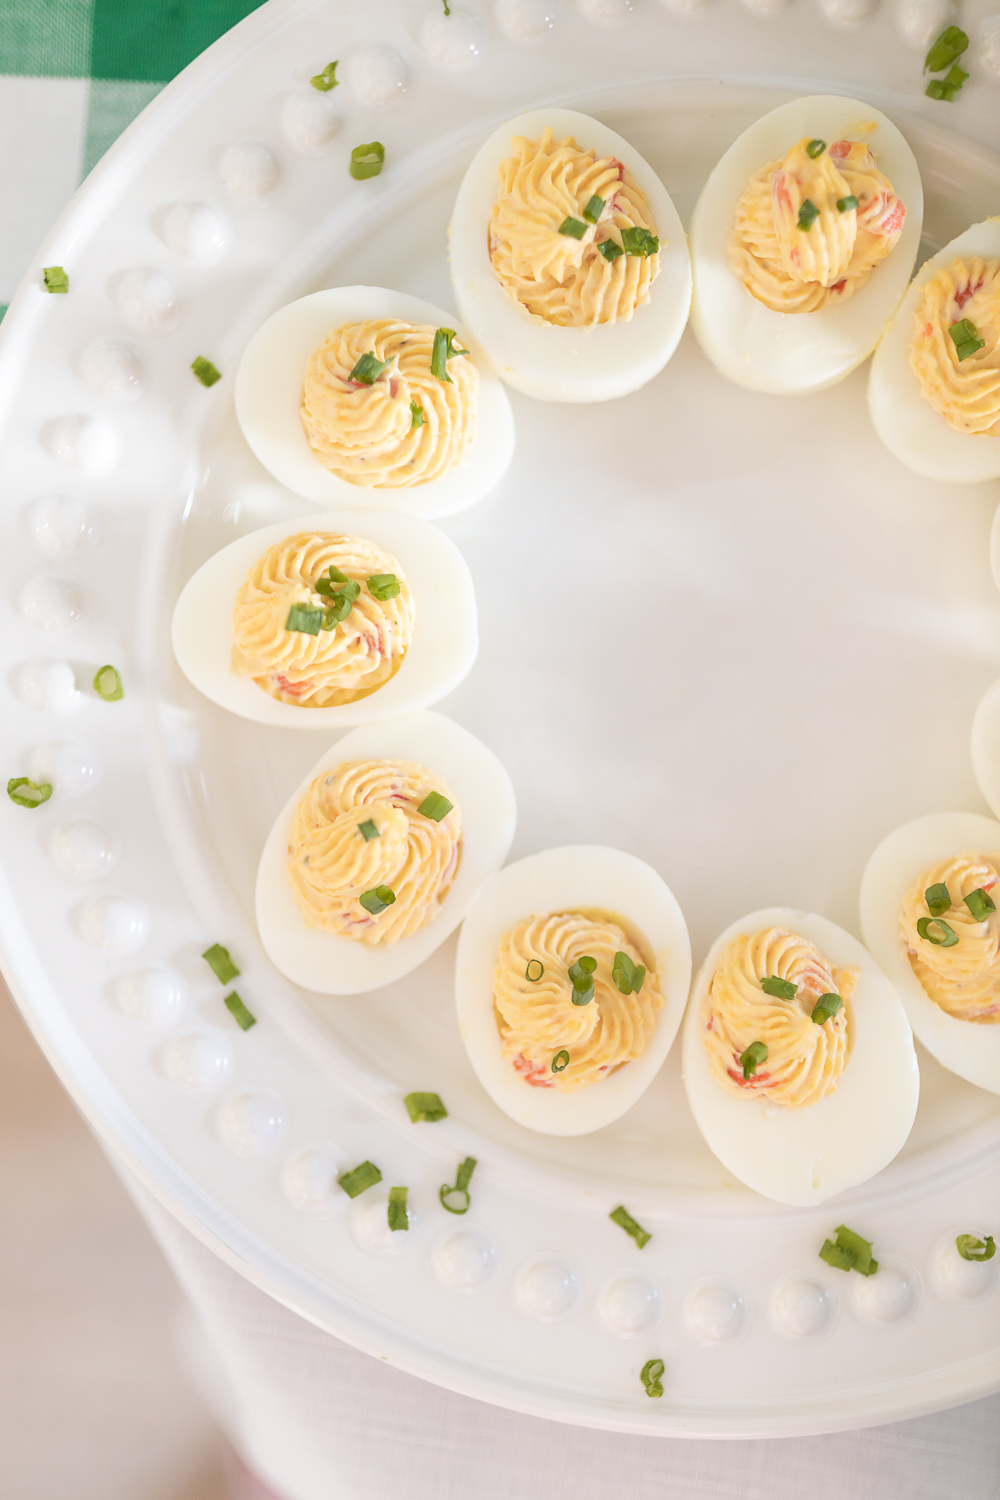 Kentucky derby recipes appetizers by blogger Stephanie Ziajka on Diary of a Debutante